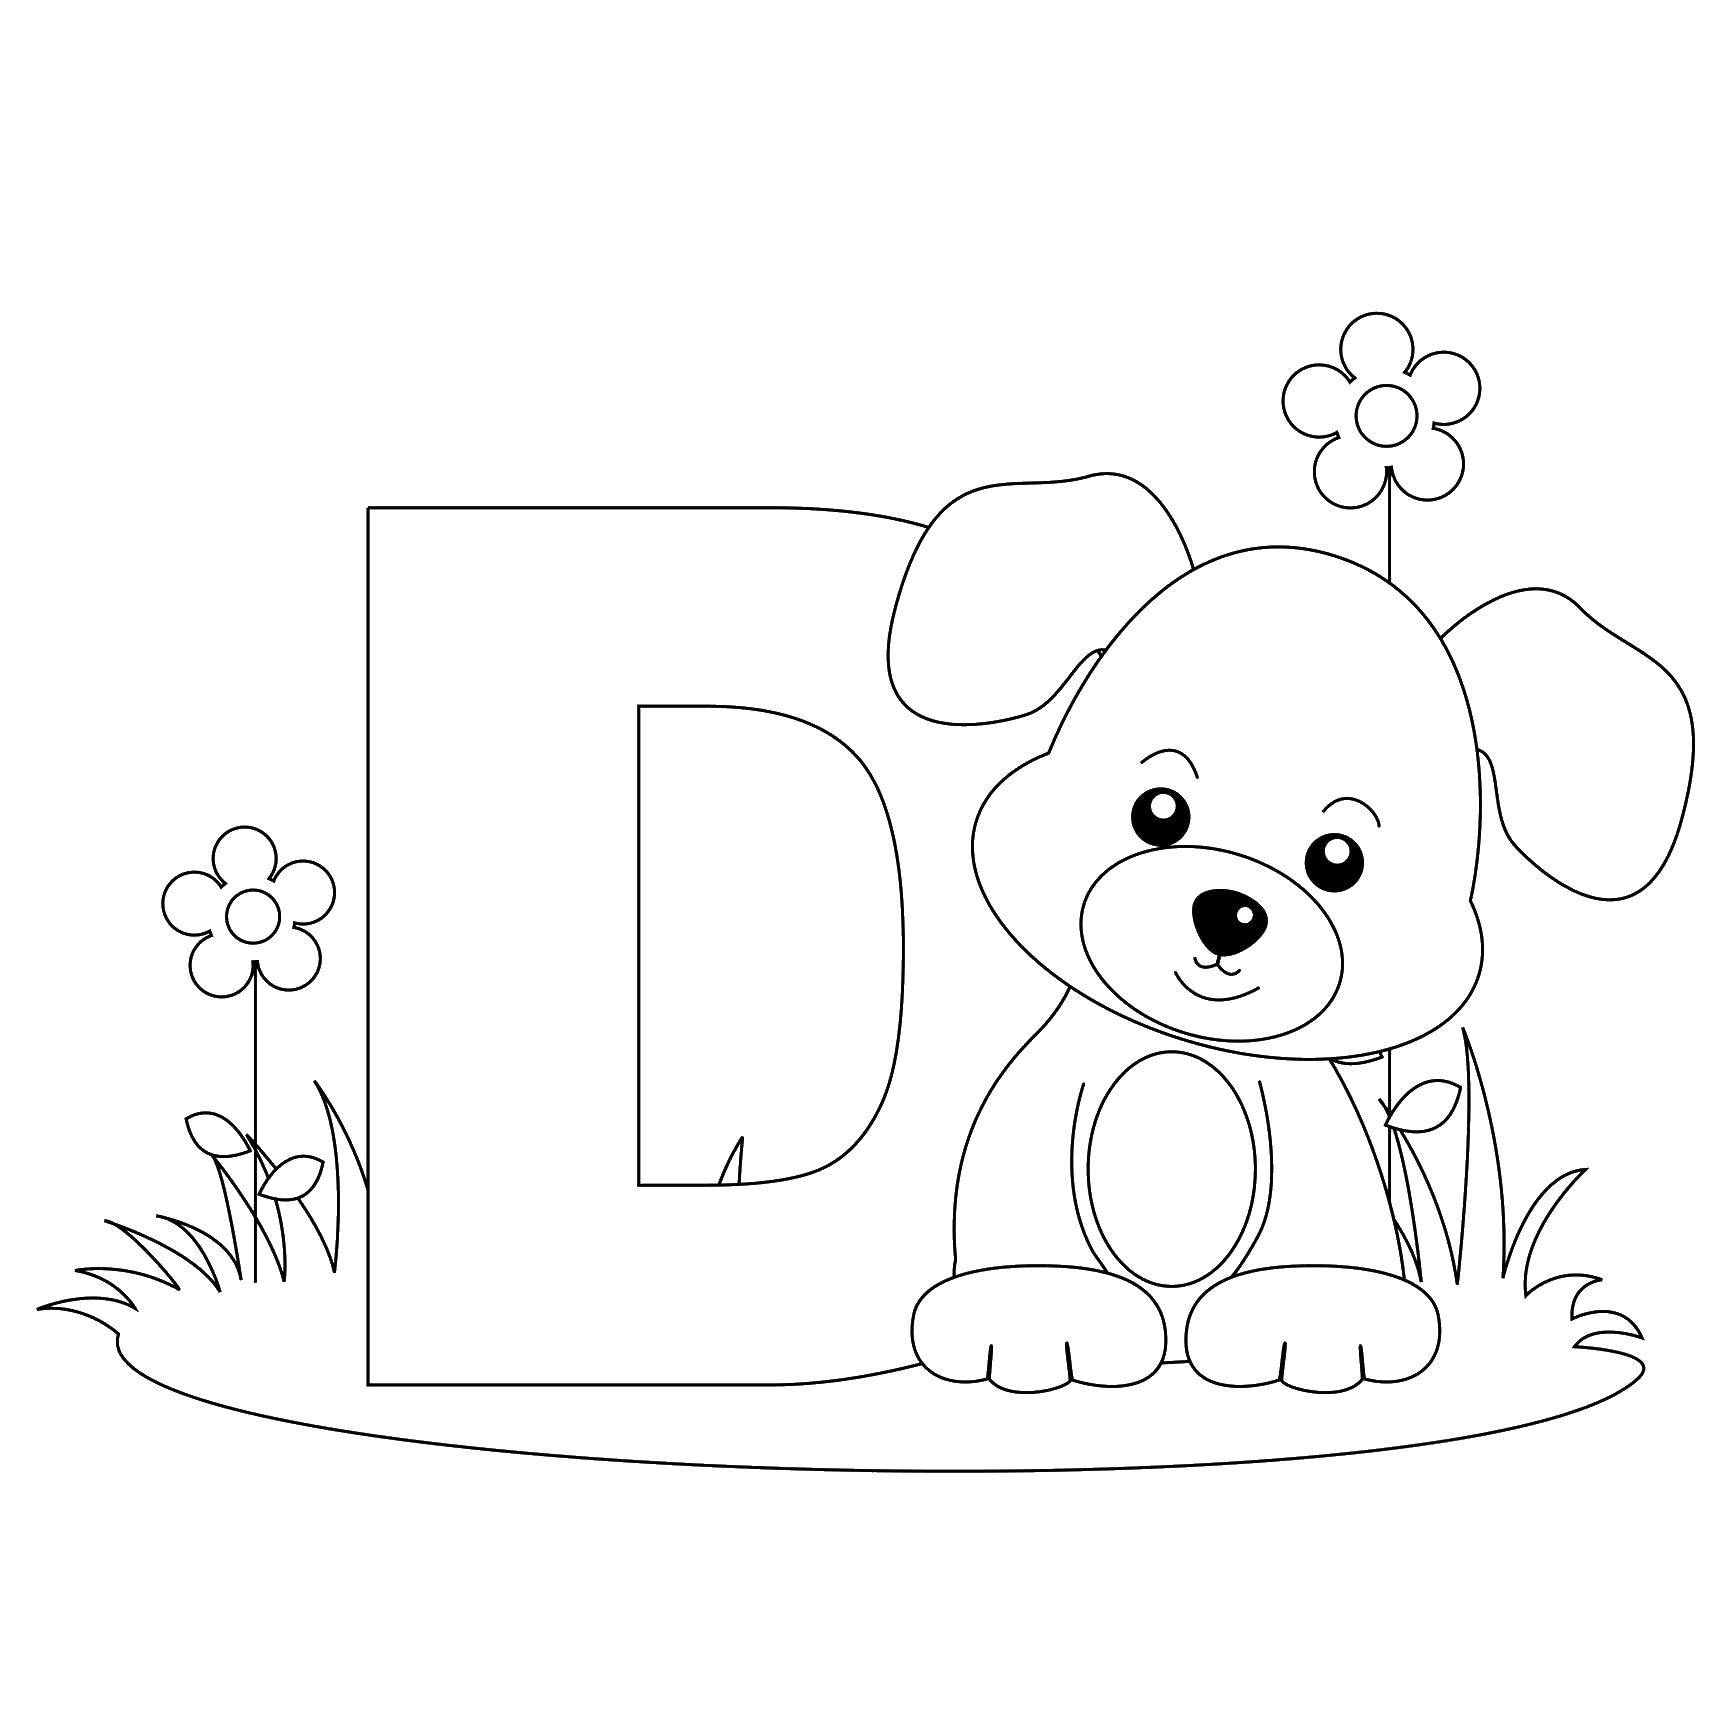 Coloring Dogs. Category English alphabet. Tags:  the English alphabet , letters, .